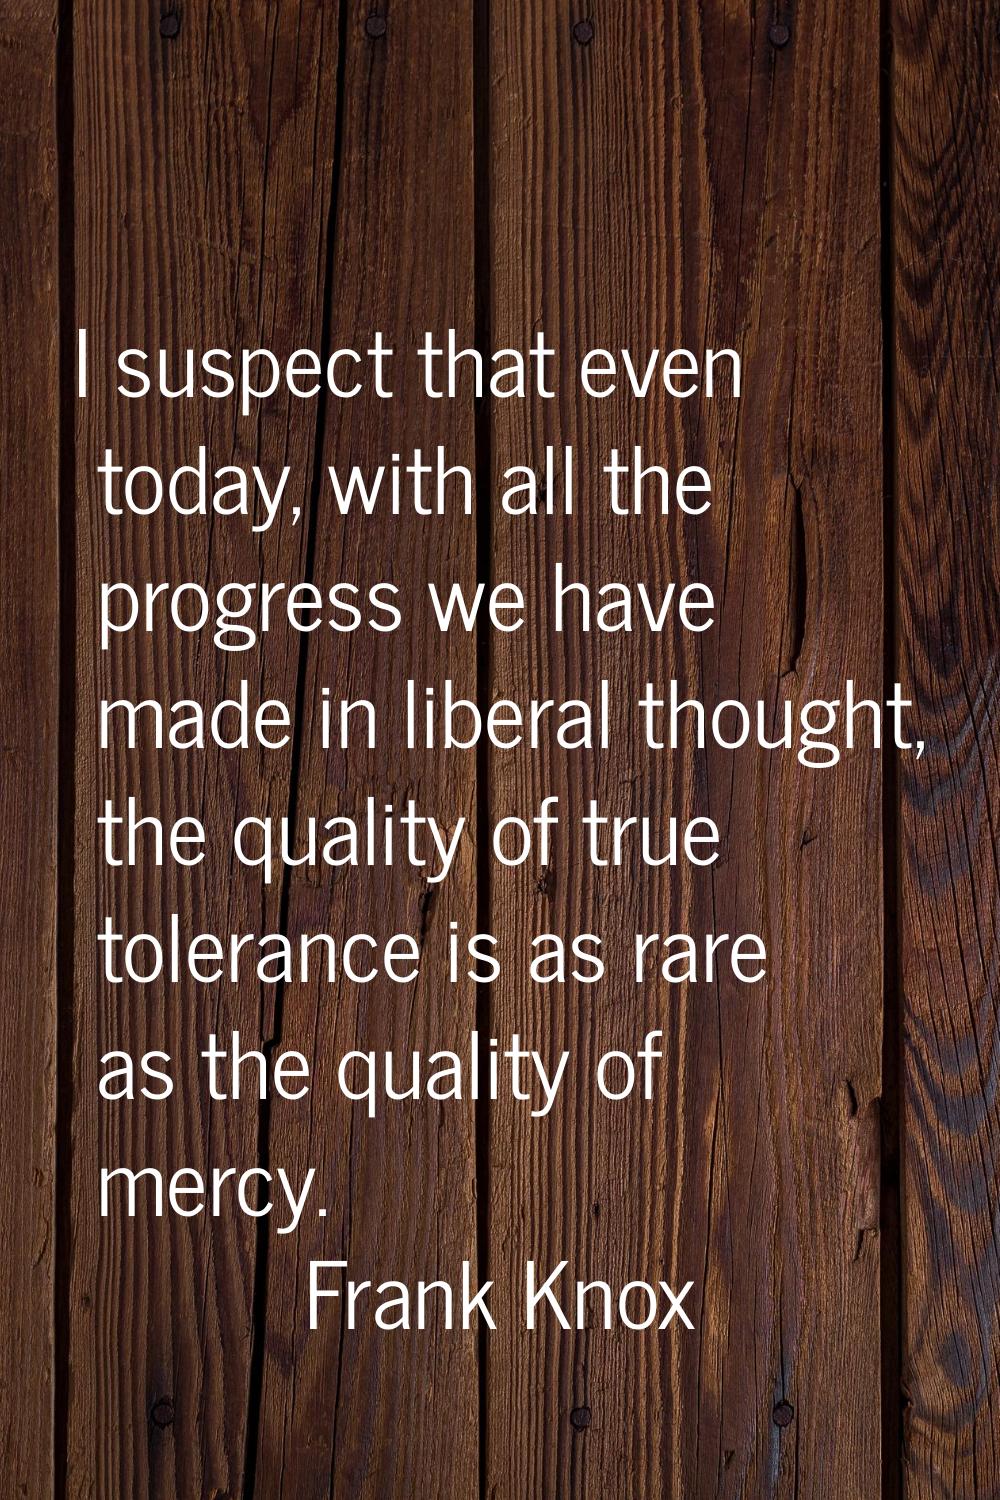 I suspect that even today, with all the progress we have made in liberal thought, the quality of tr